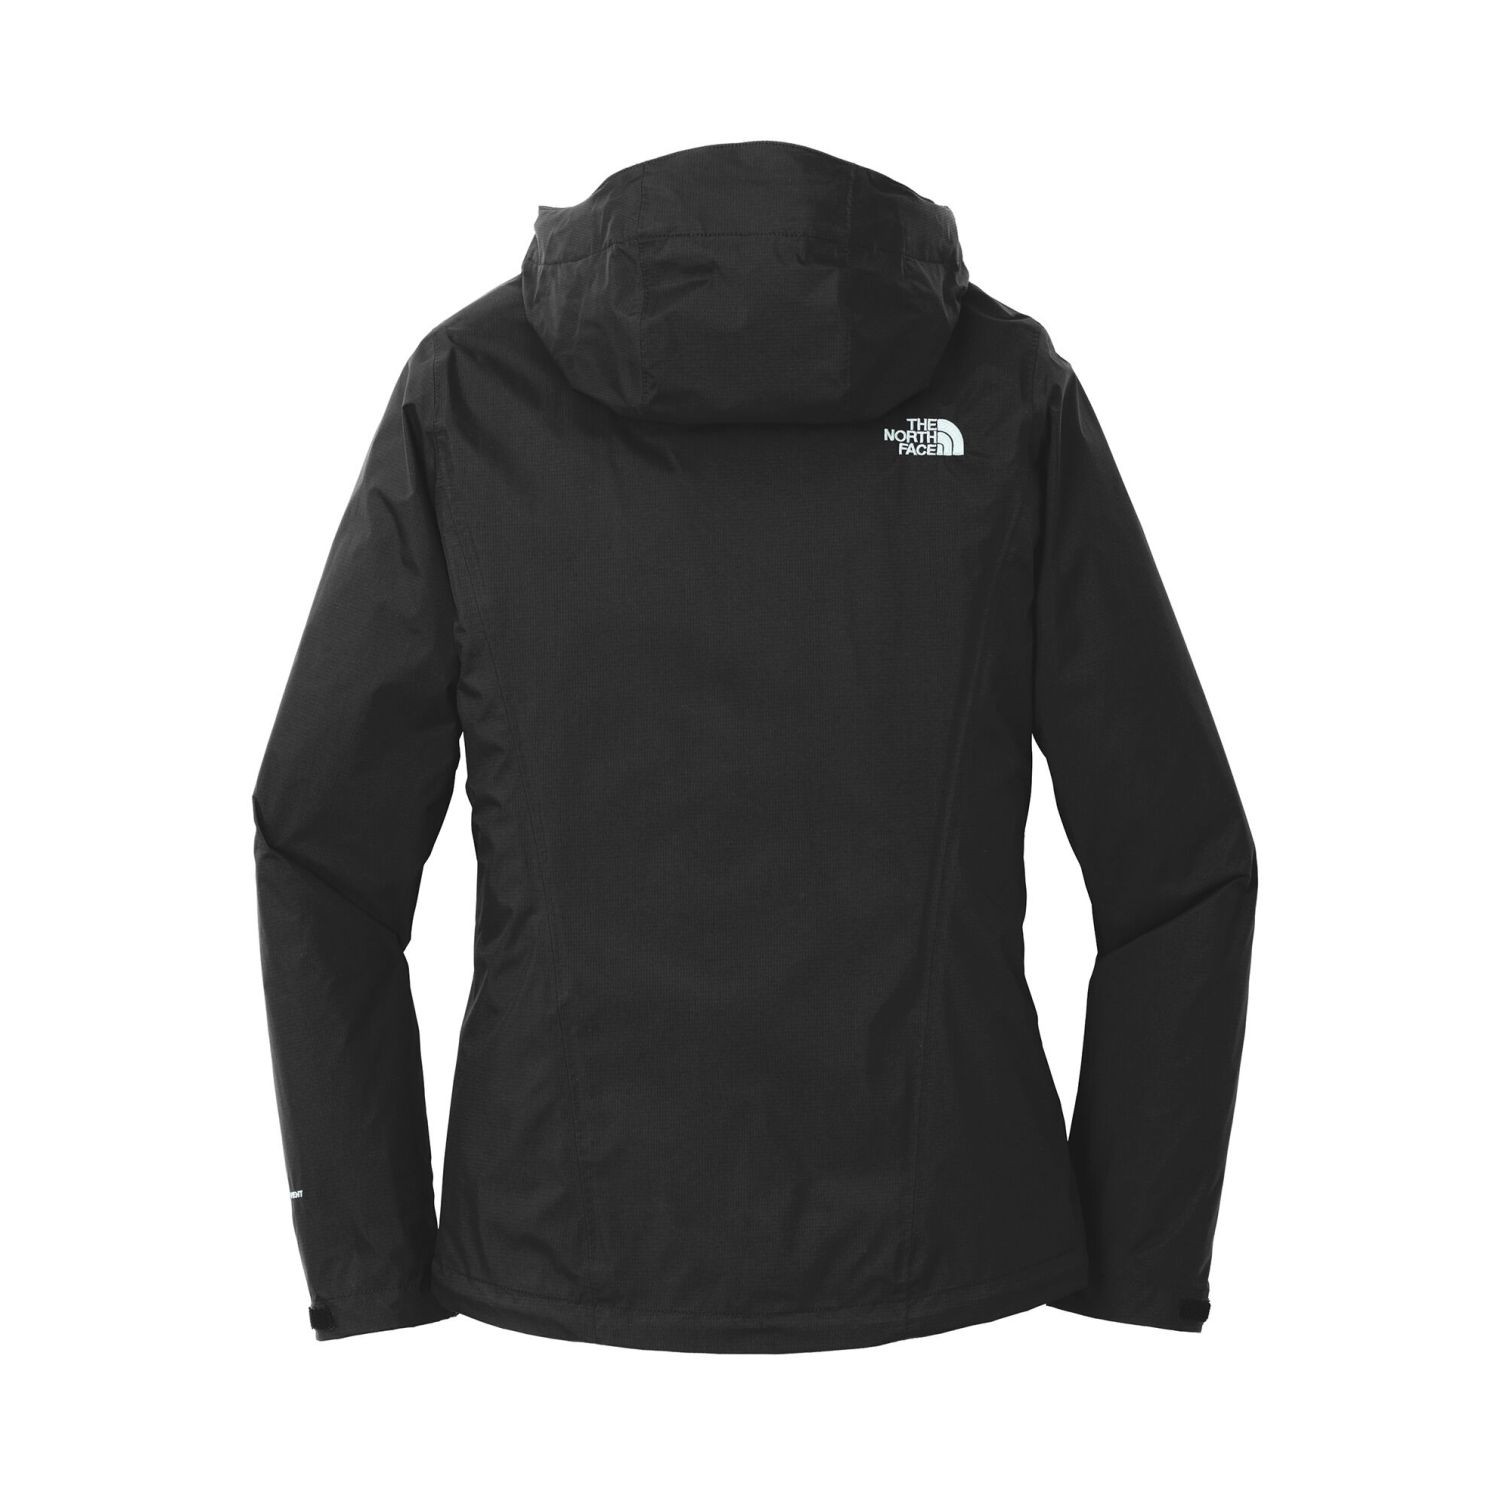 THE NORTH FACE DRYVENT LADIES' RAIN JACKET #NF0A3LH5 Black Back